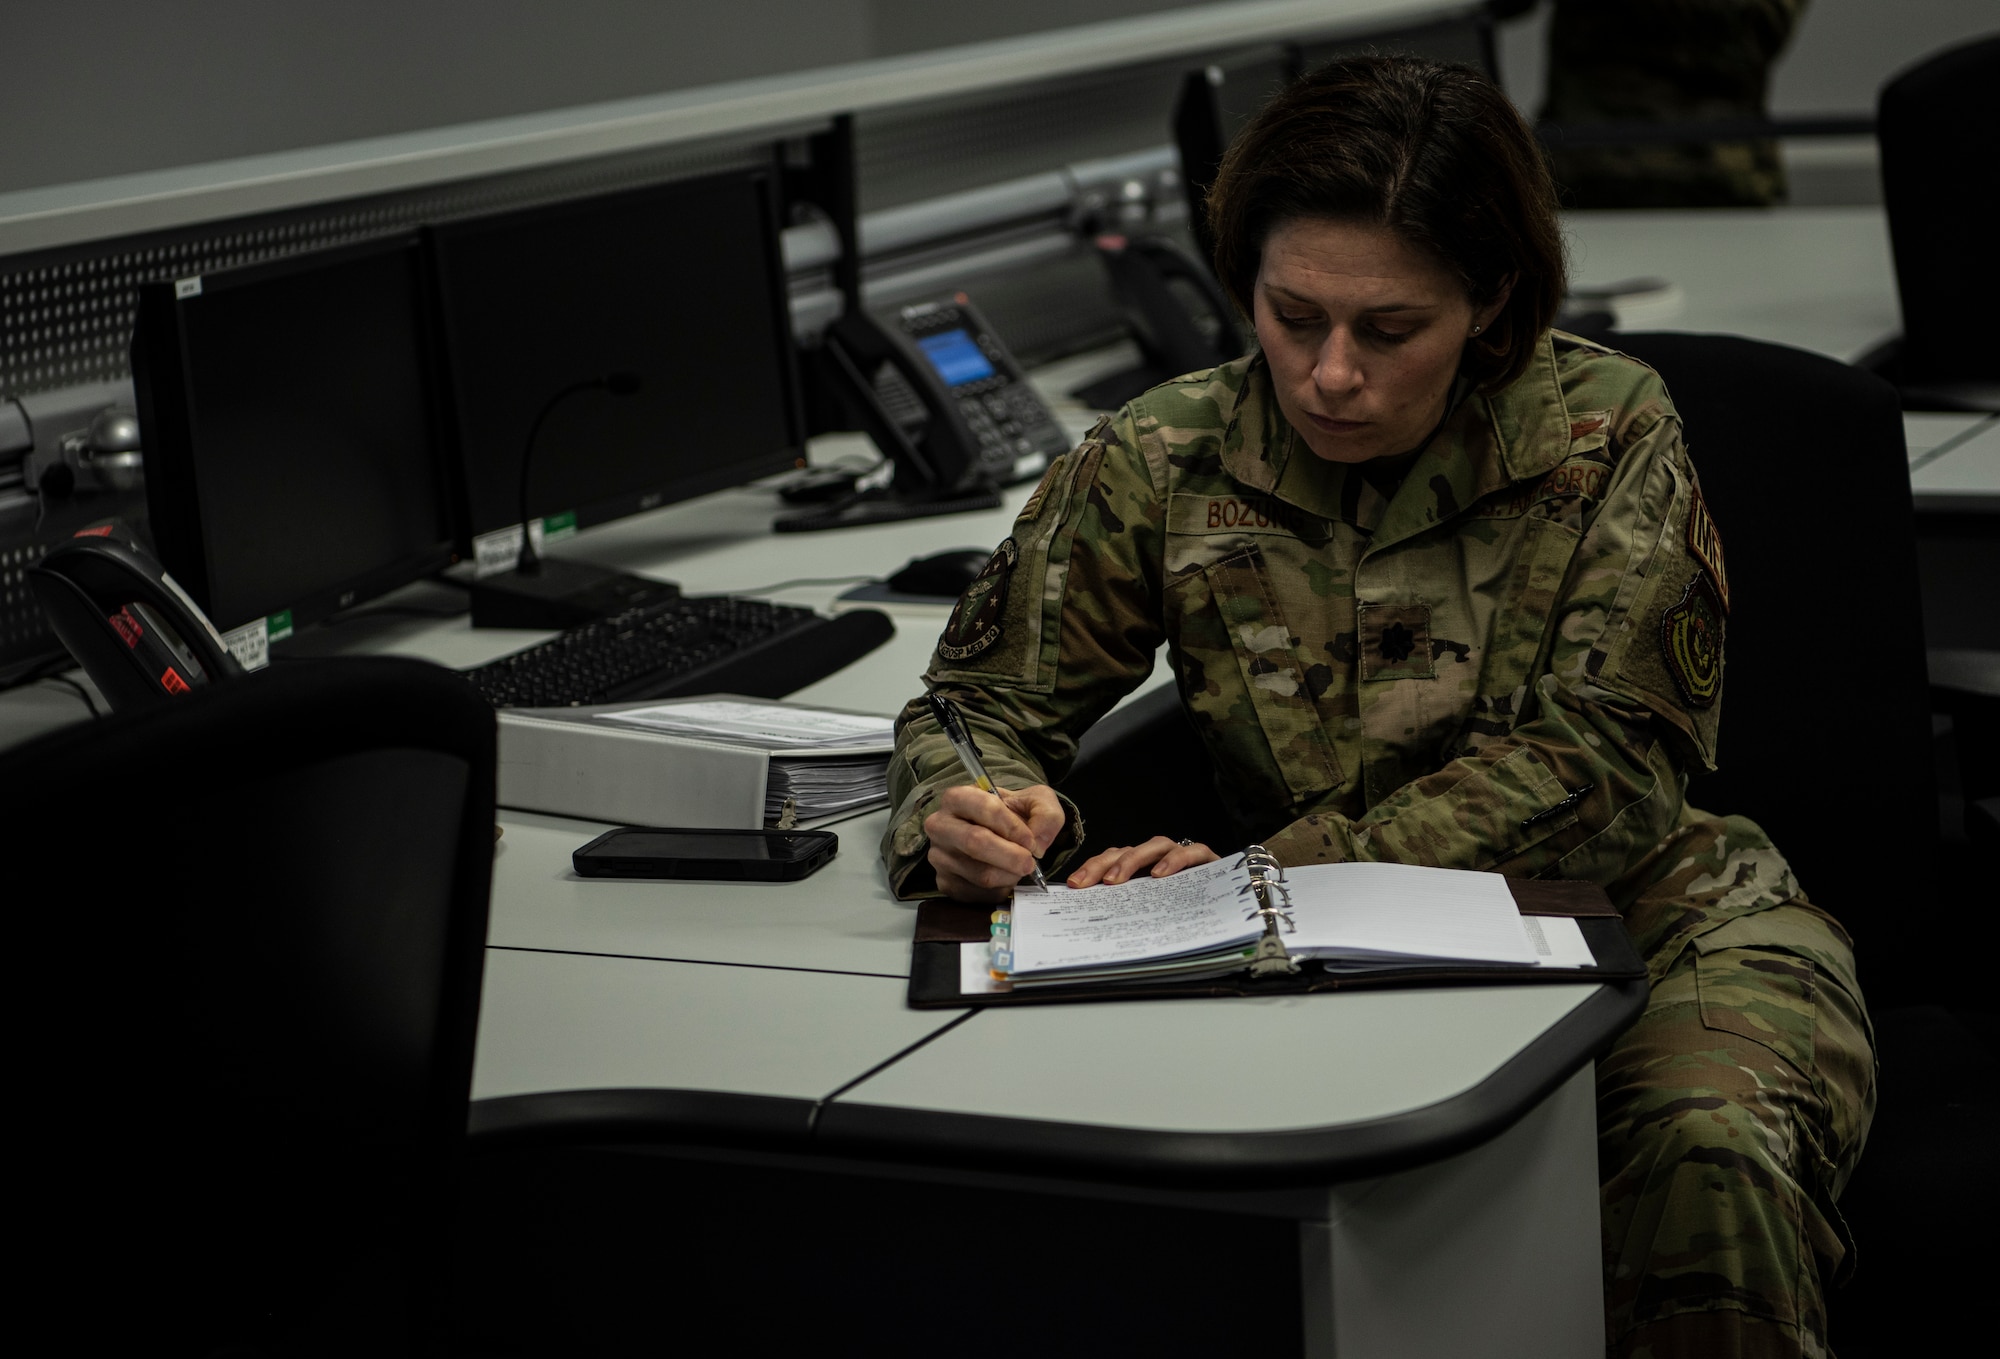 U.S. Air Force Lt. Col. (Dr.) Tracy K. Bozung, 86th Aerospace Medicine Squadron commander, takes notes during an Operational Planning Team meeting at Ramstein Air Base, Germany, March 24, 2020.